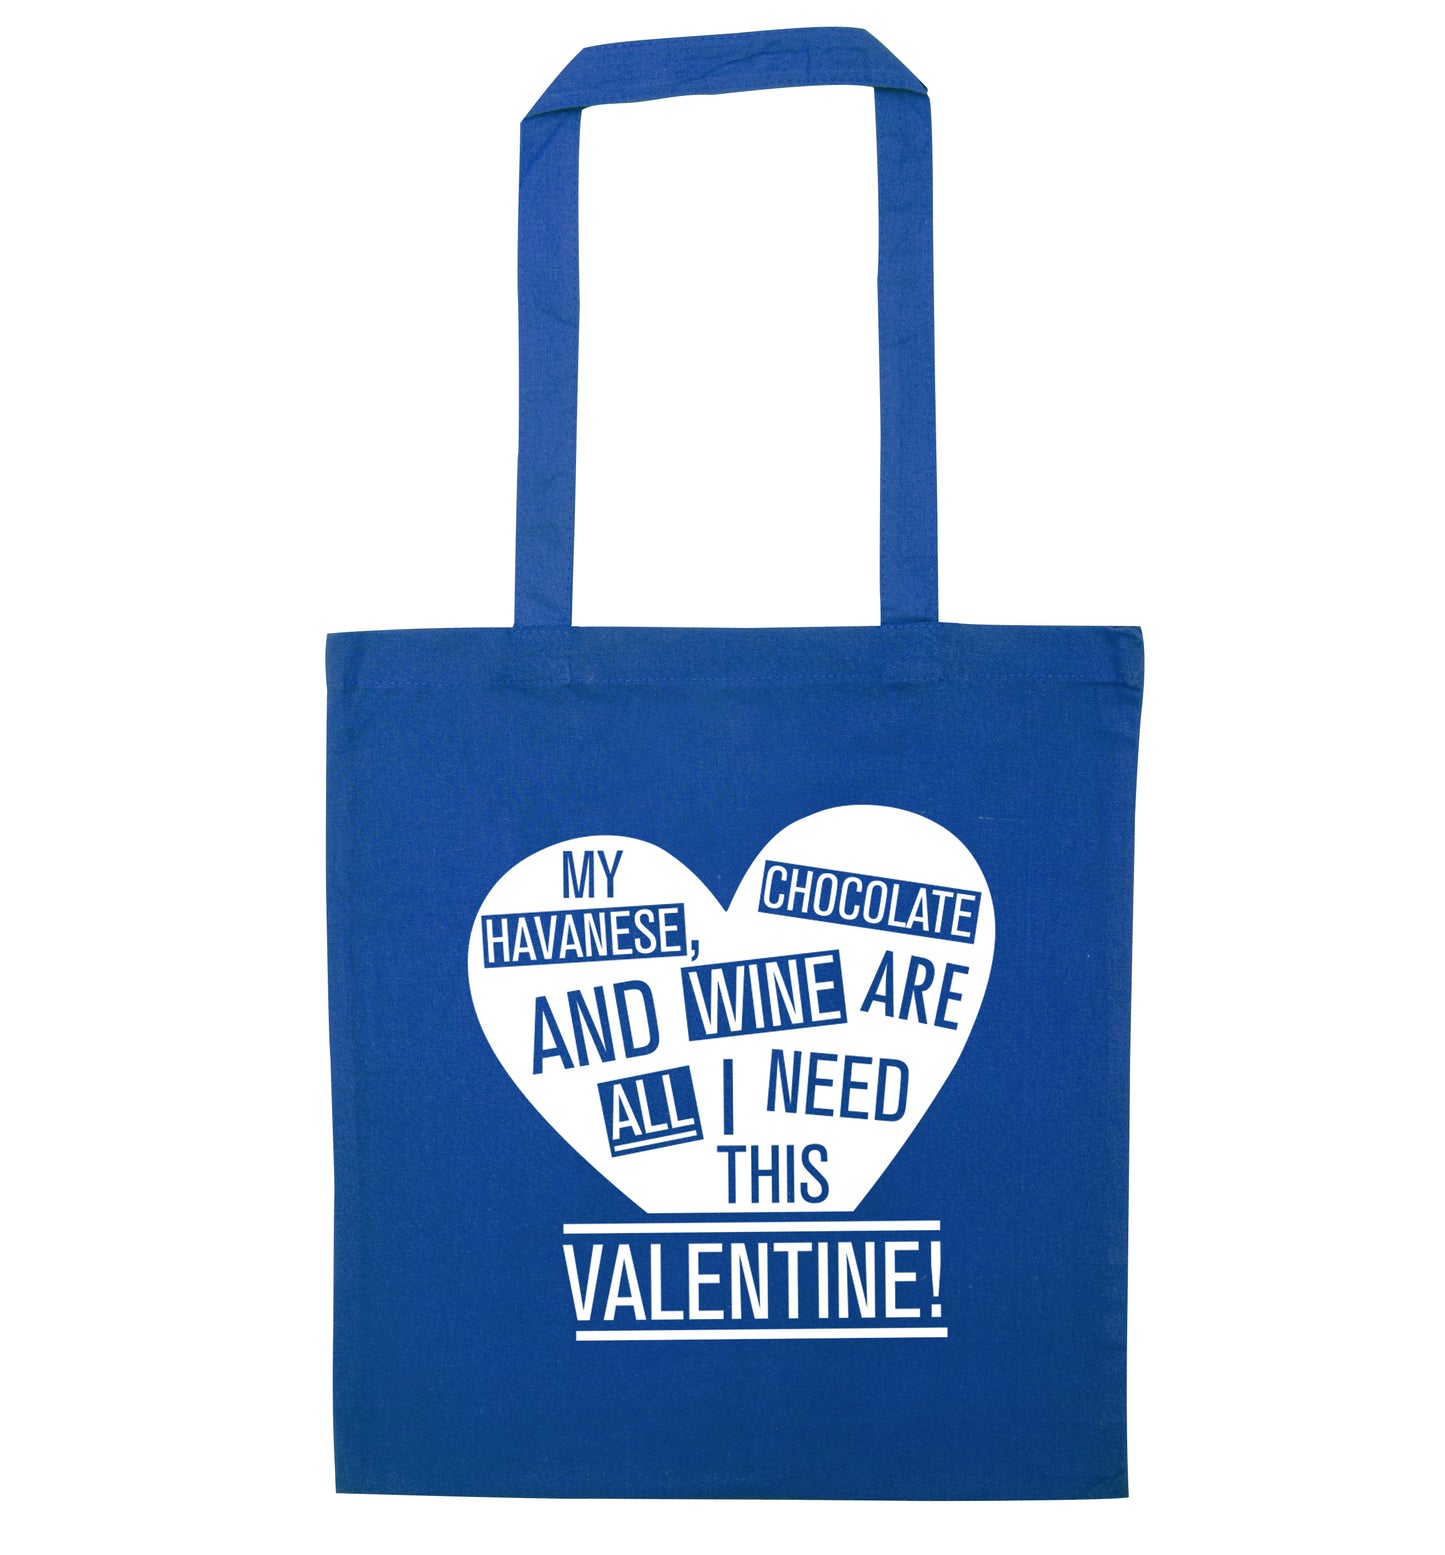 My havanese, chocolate and wine are all I need this valentine! blue tote bag